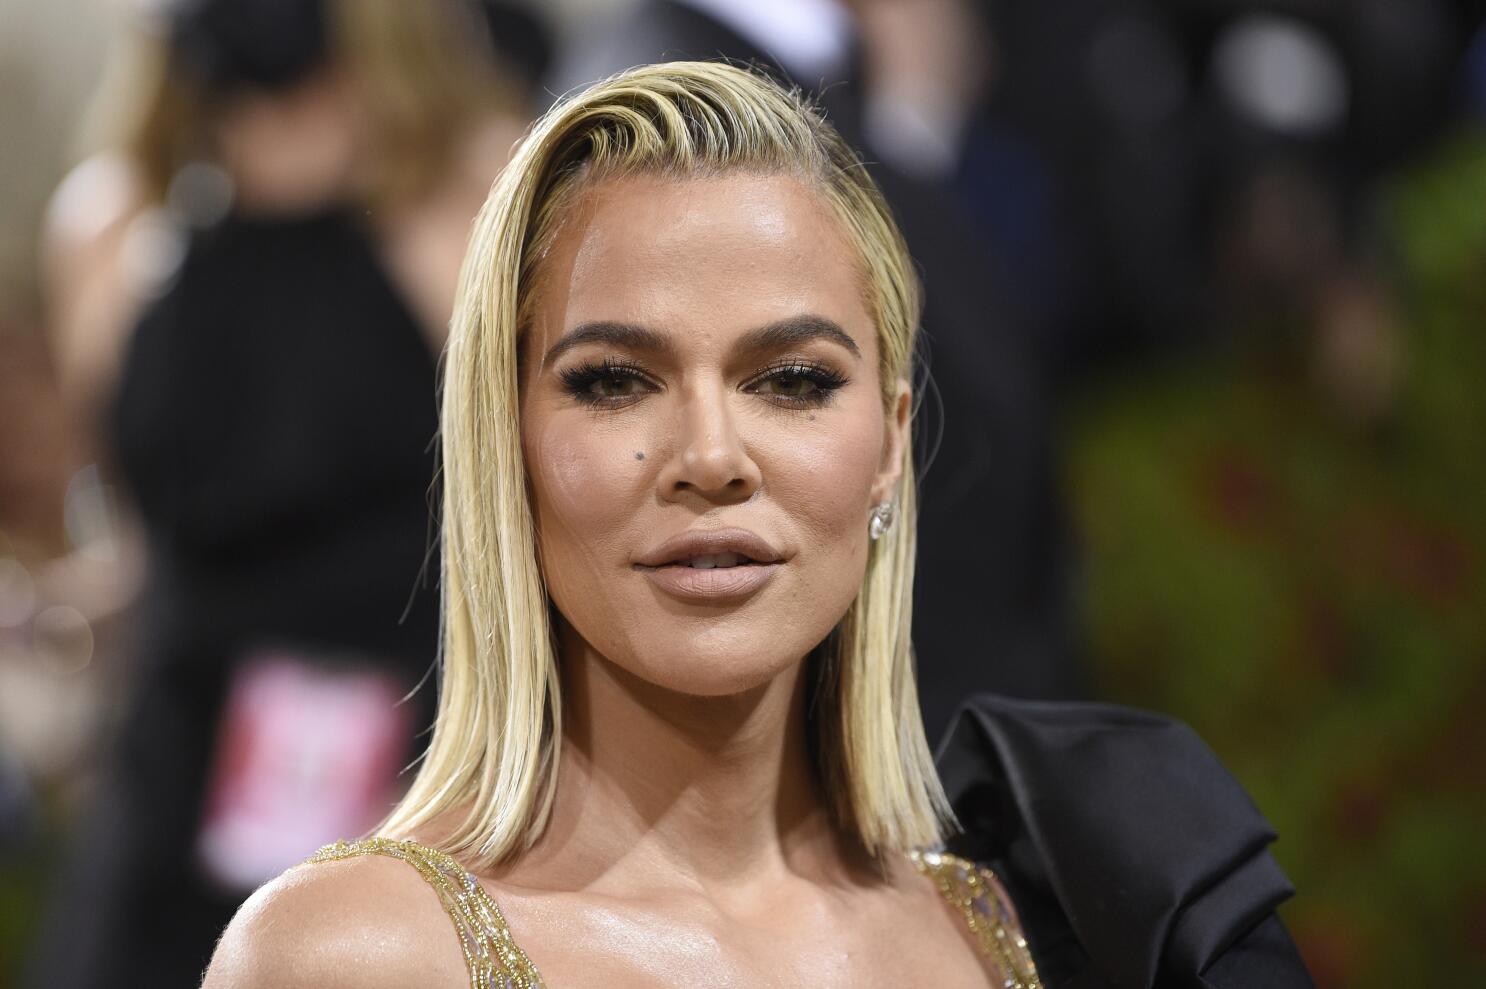 Khloe Kardashian's catsuit has a seriously plunging low back